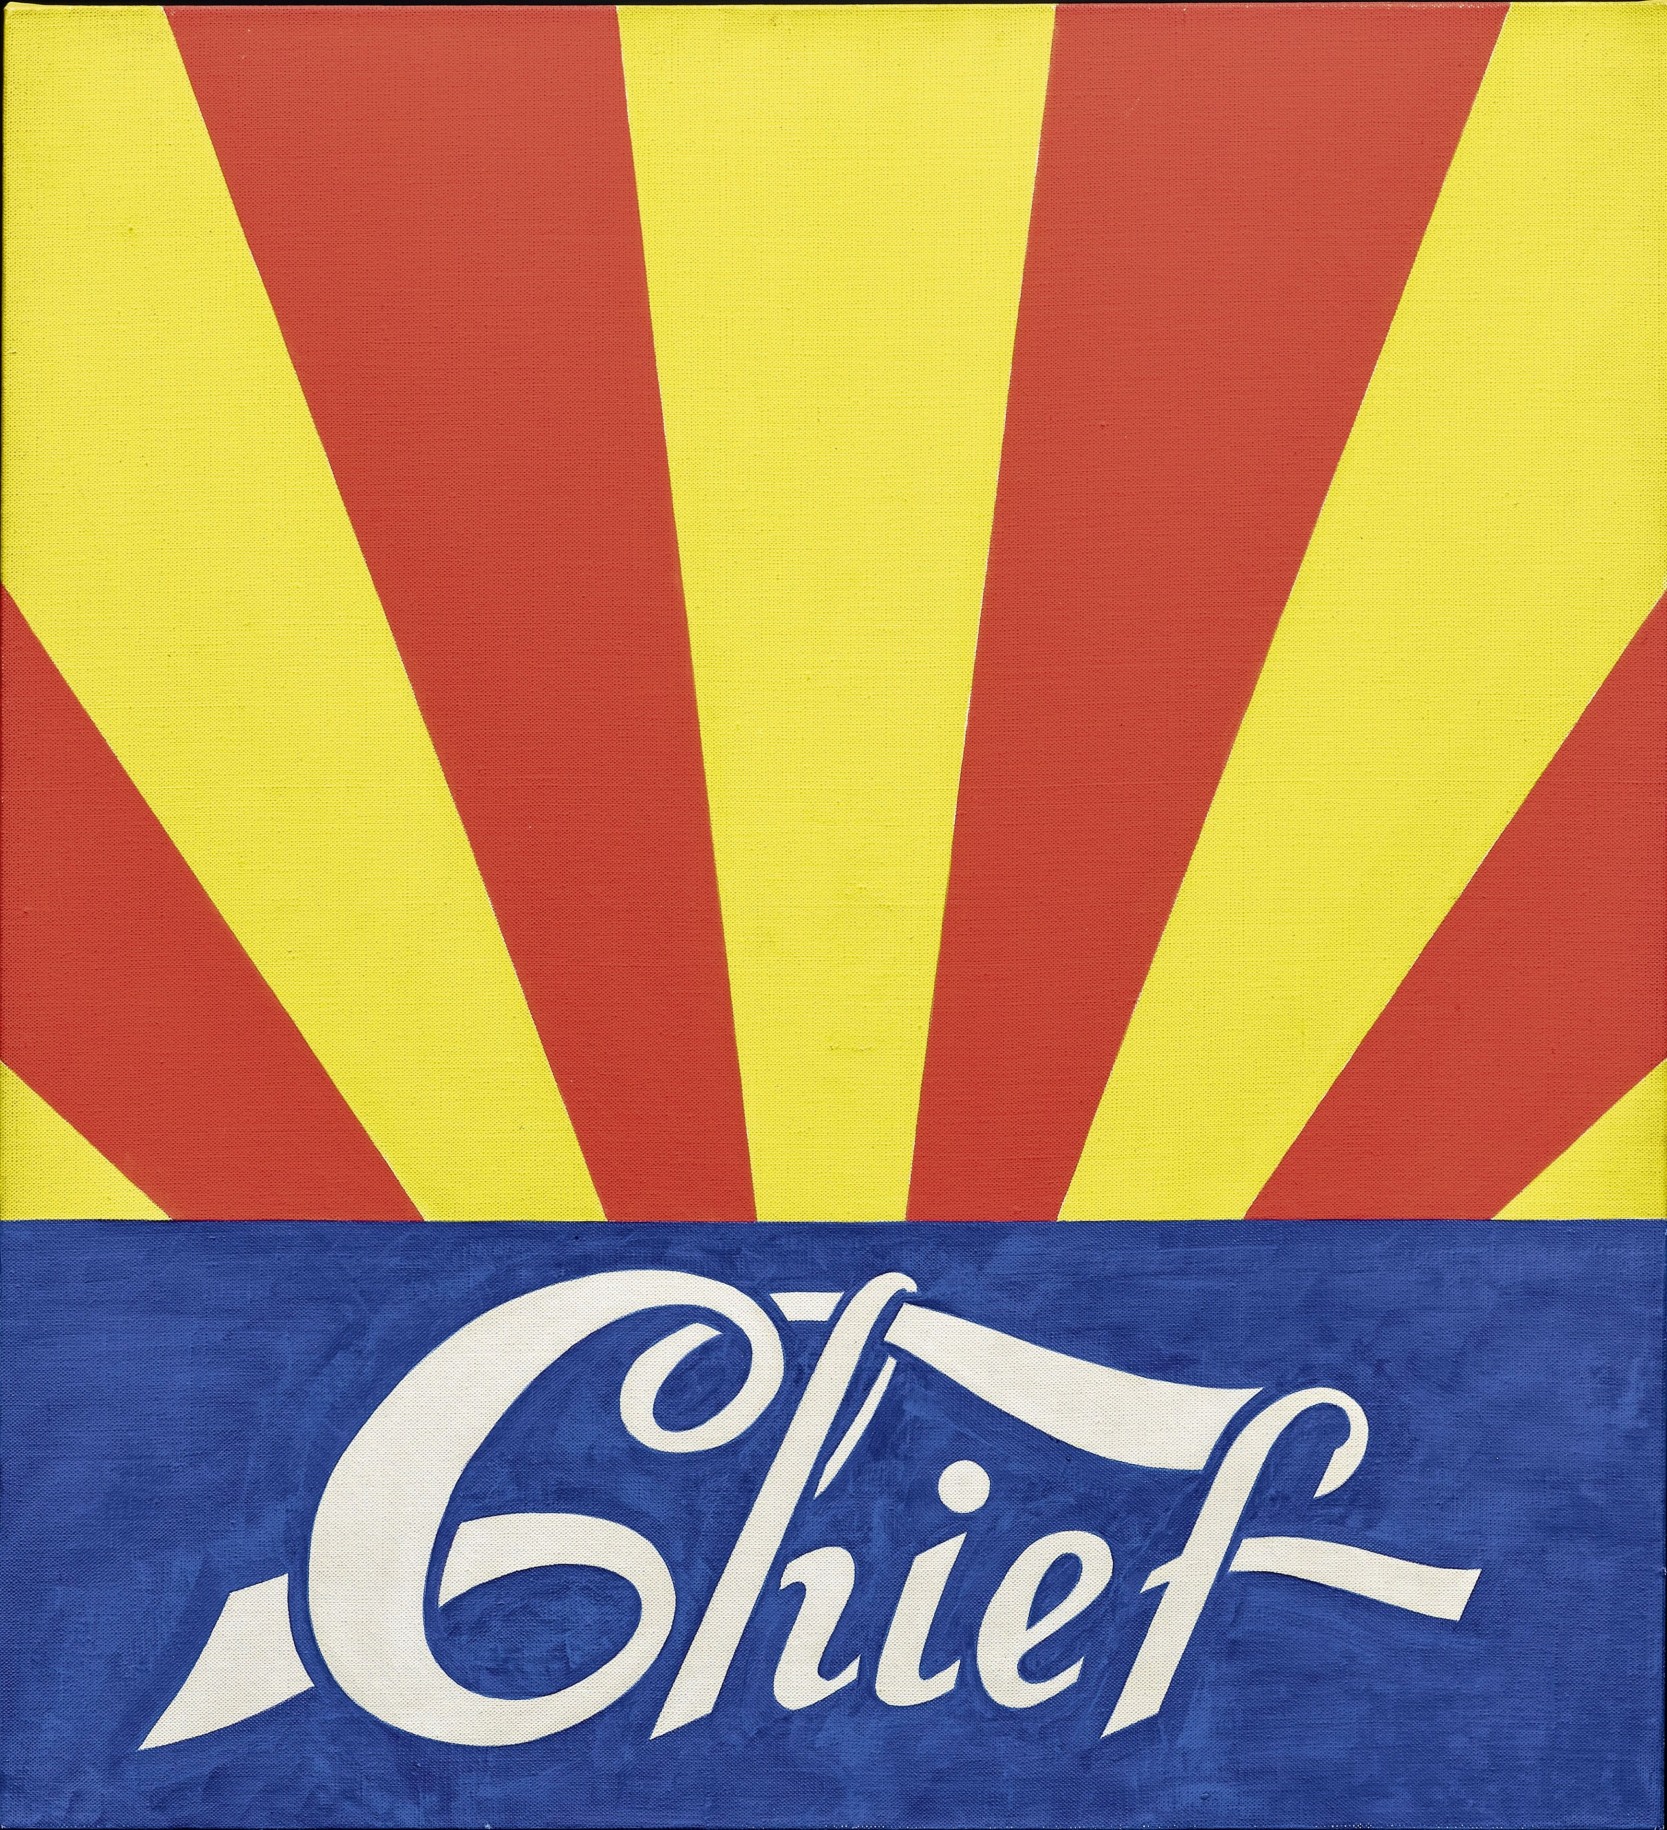 A 24 by 22 inch painting. The bottom third is blue, with the title, Chief, painted in white letters. Emanating from the blue band at the bottom and covering the top two thirds of the canvas are alternating red and yellow rays.